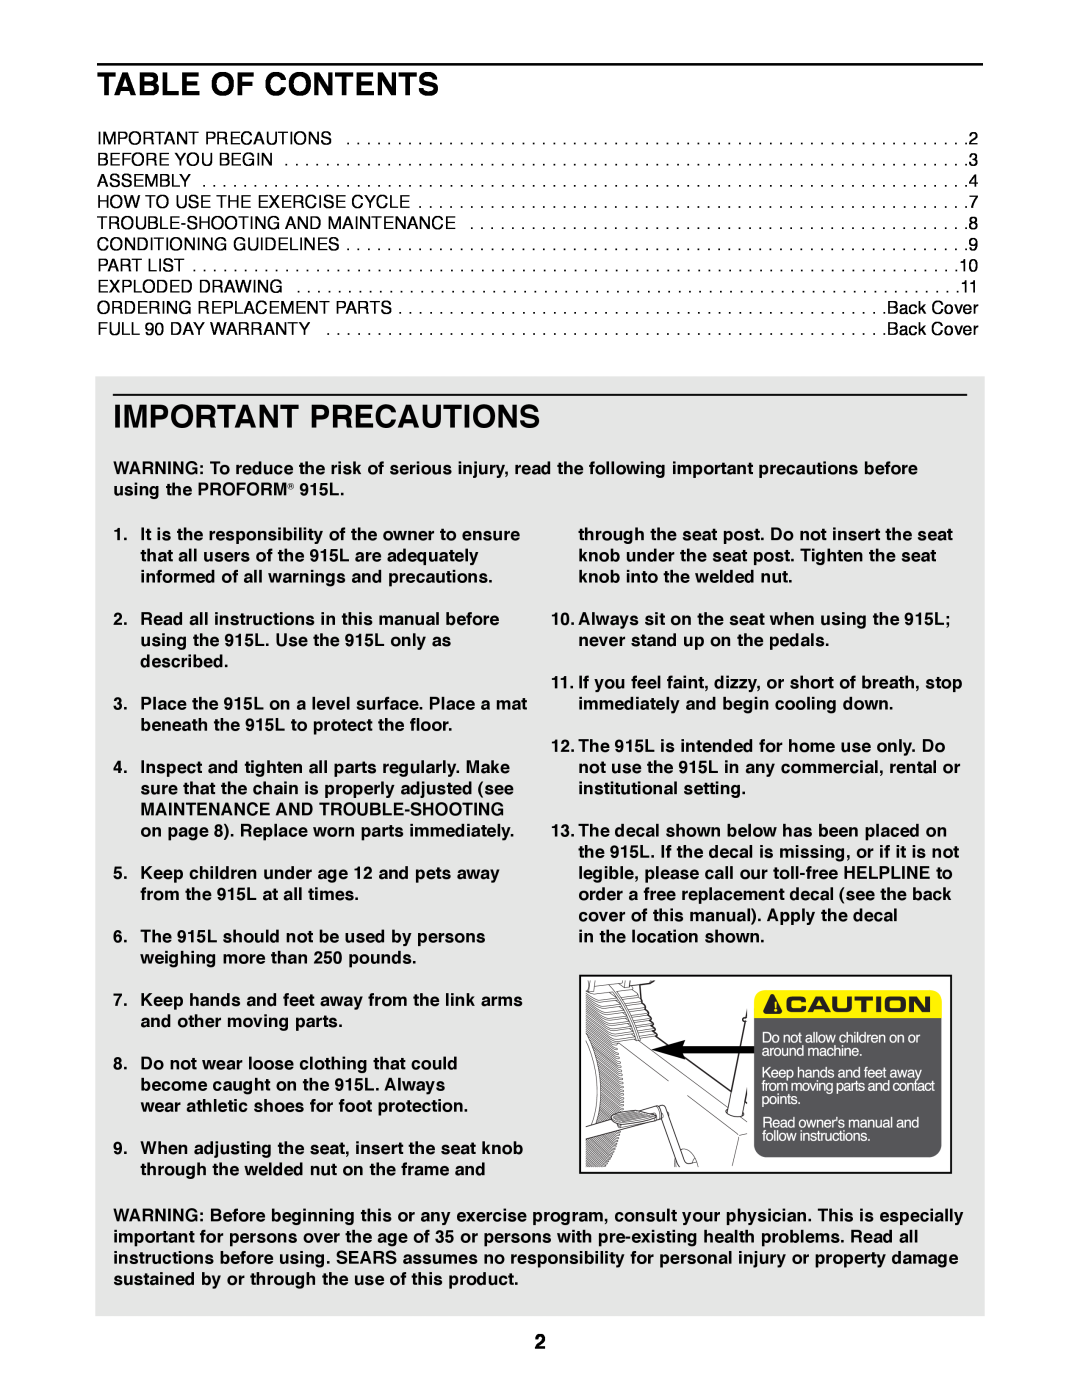 Sears 831.288264 manual Table Of Contents, Important Precautions, in the location shown 